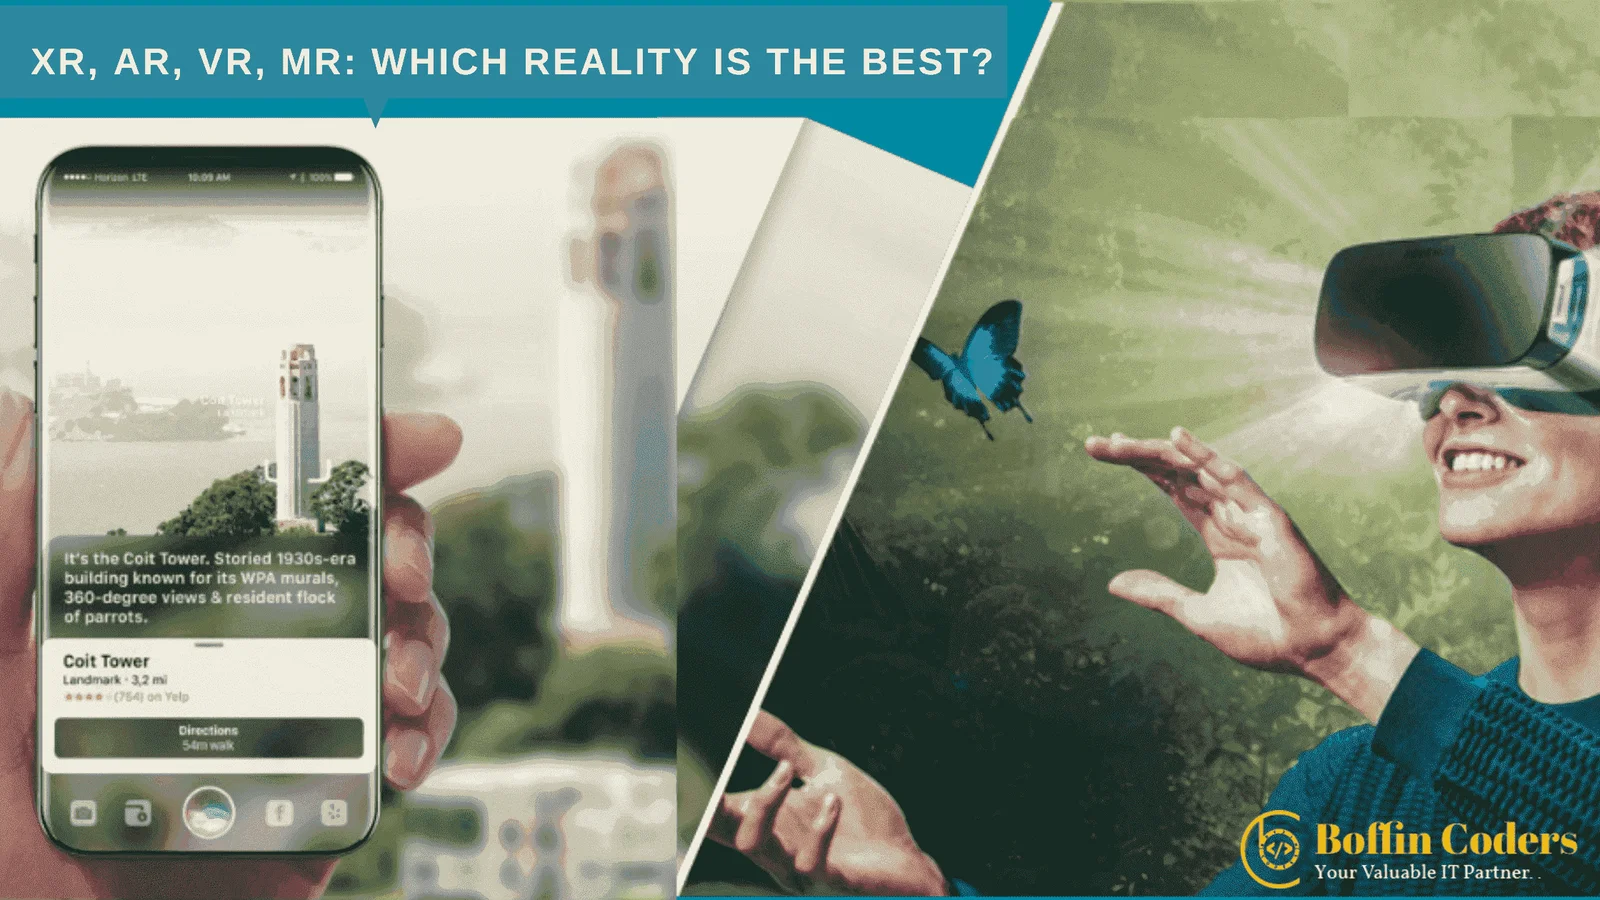 XR, AR, VR, MR: Which reality is the Best?